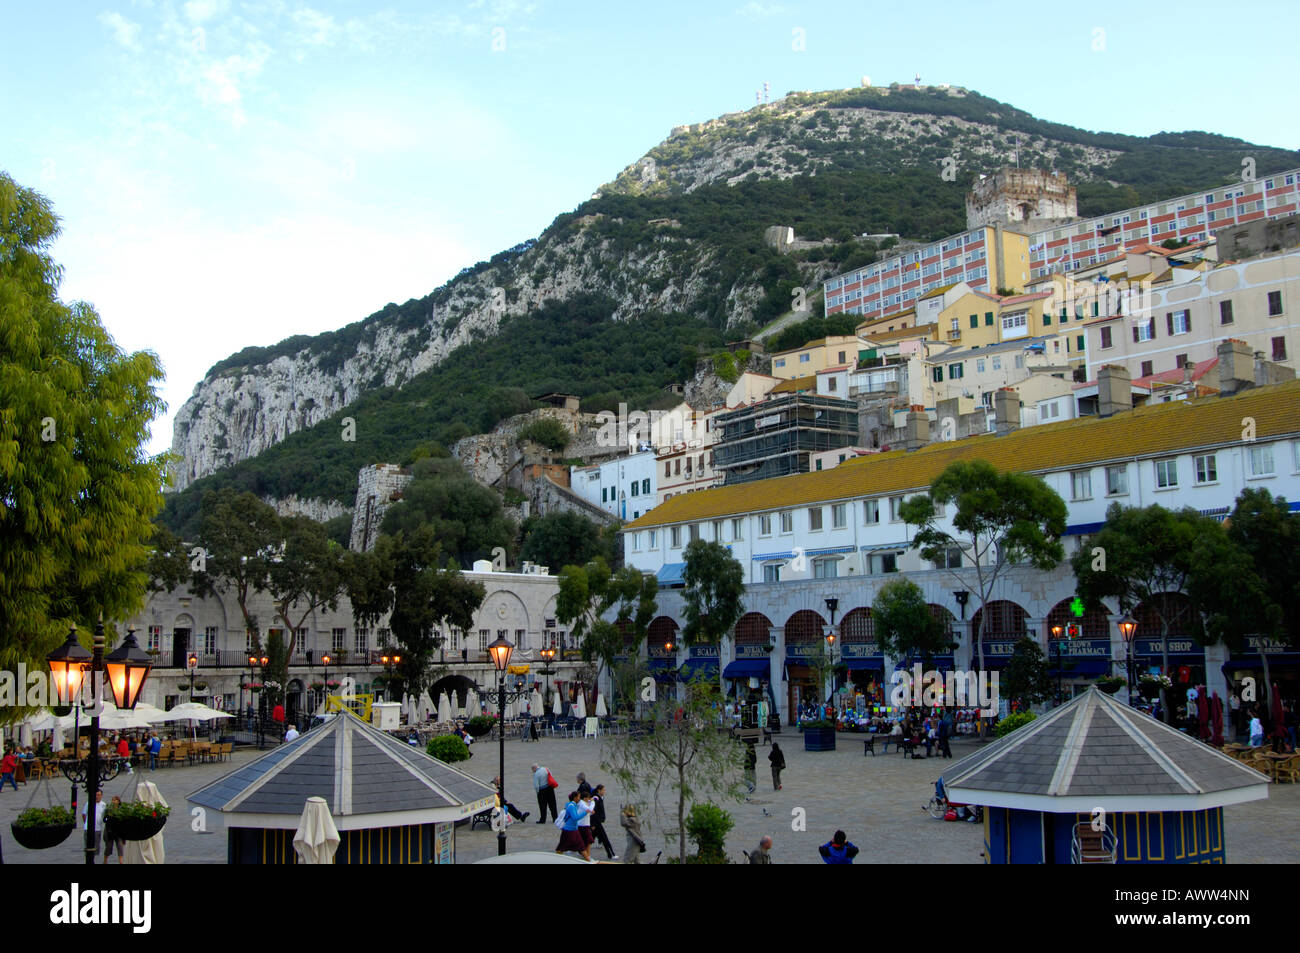 Grand Casemates Square on the Rock of Gibraltar Stock Photo